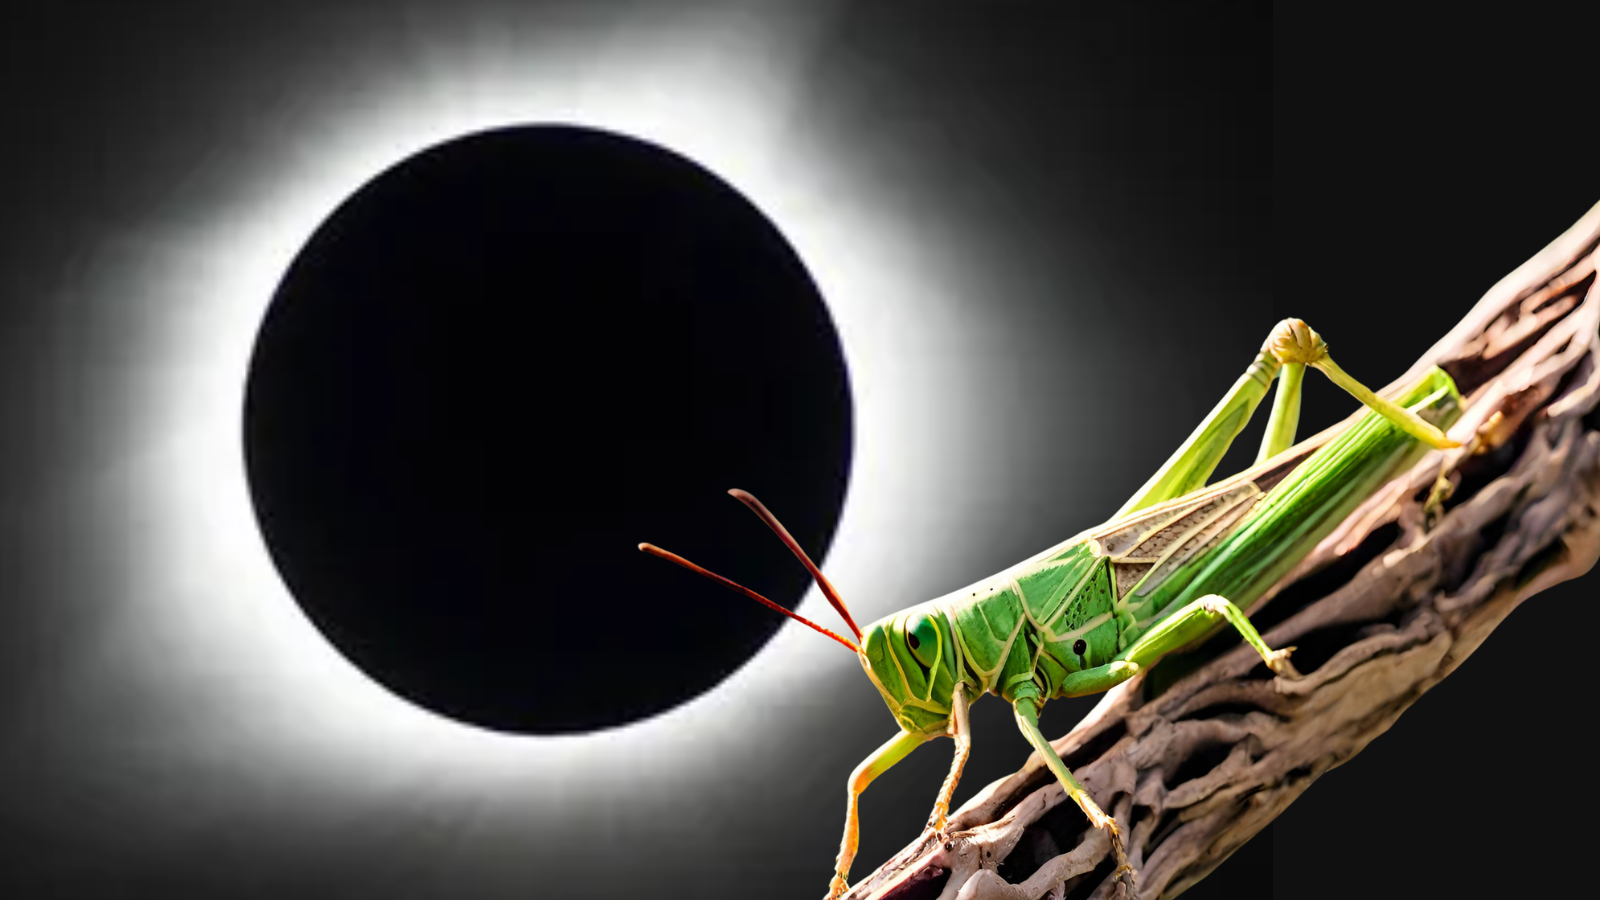 An illustration shows a grasshopper on a branch with the total eclipse in the background